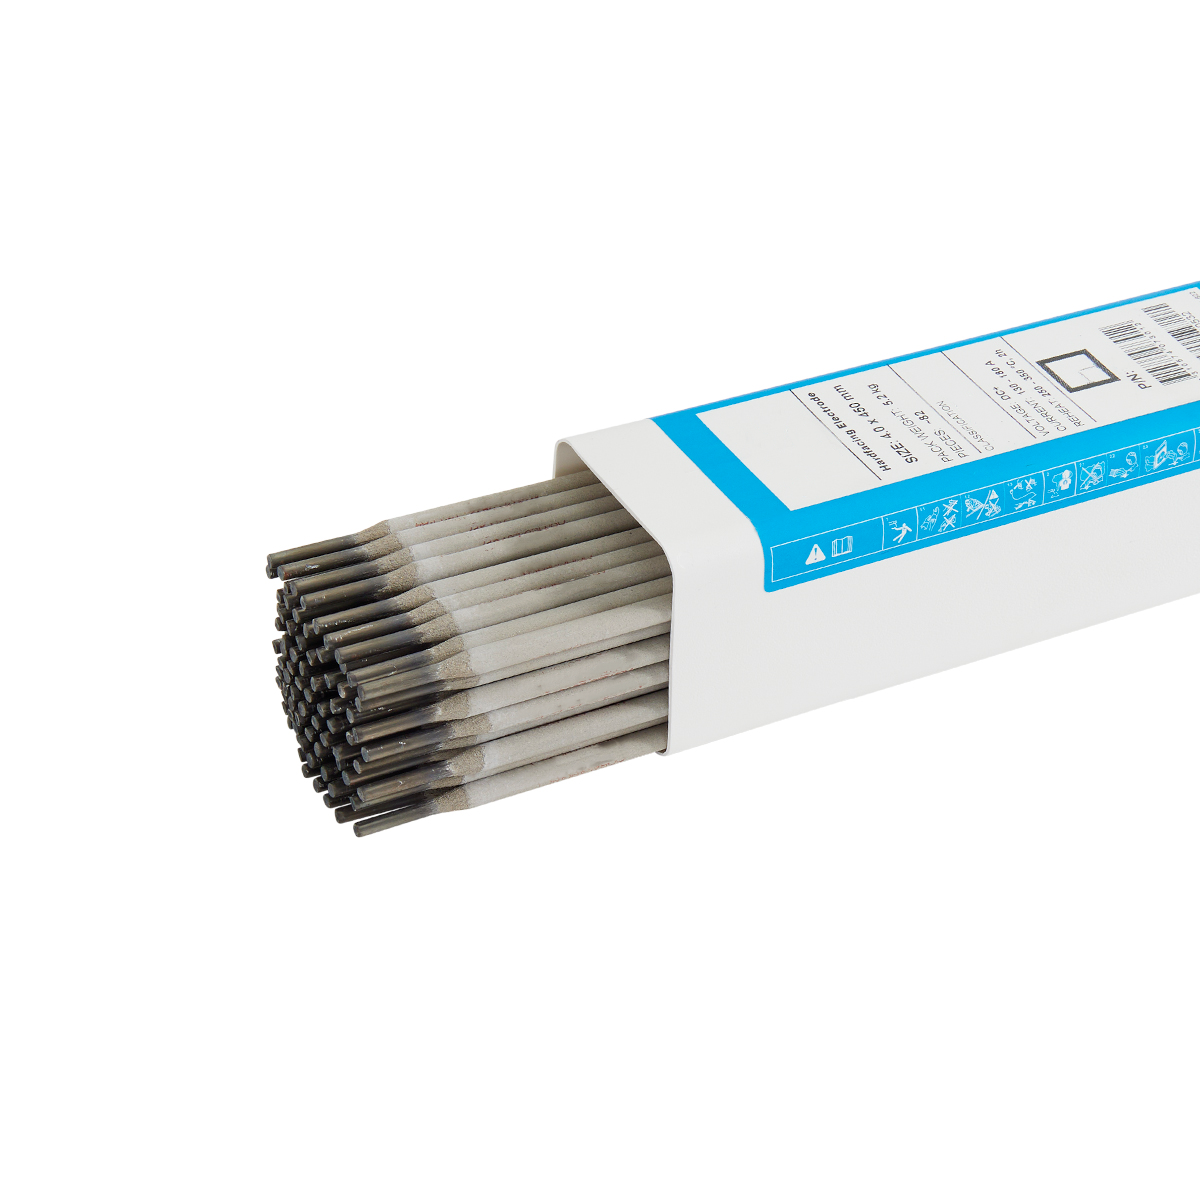 Cigweld Satincrome 309Mo-17 Welding Electrodes